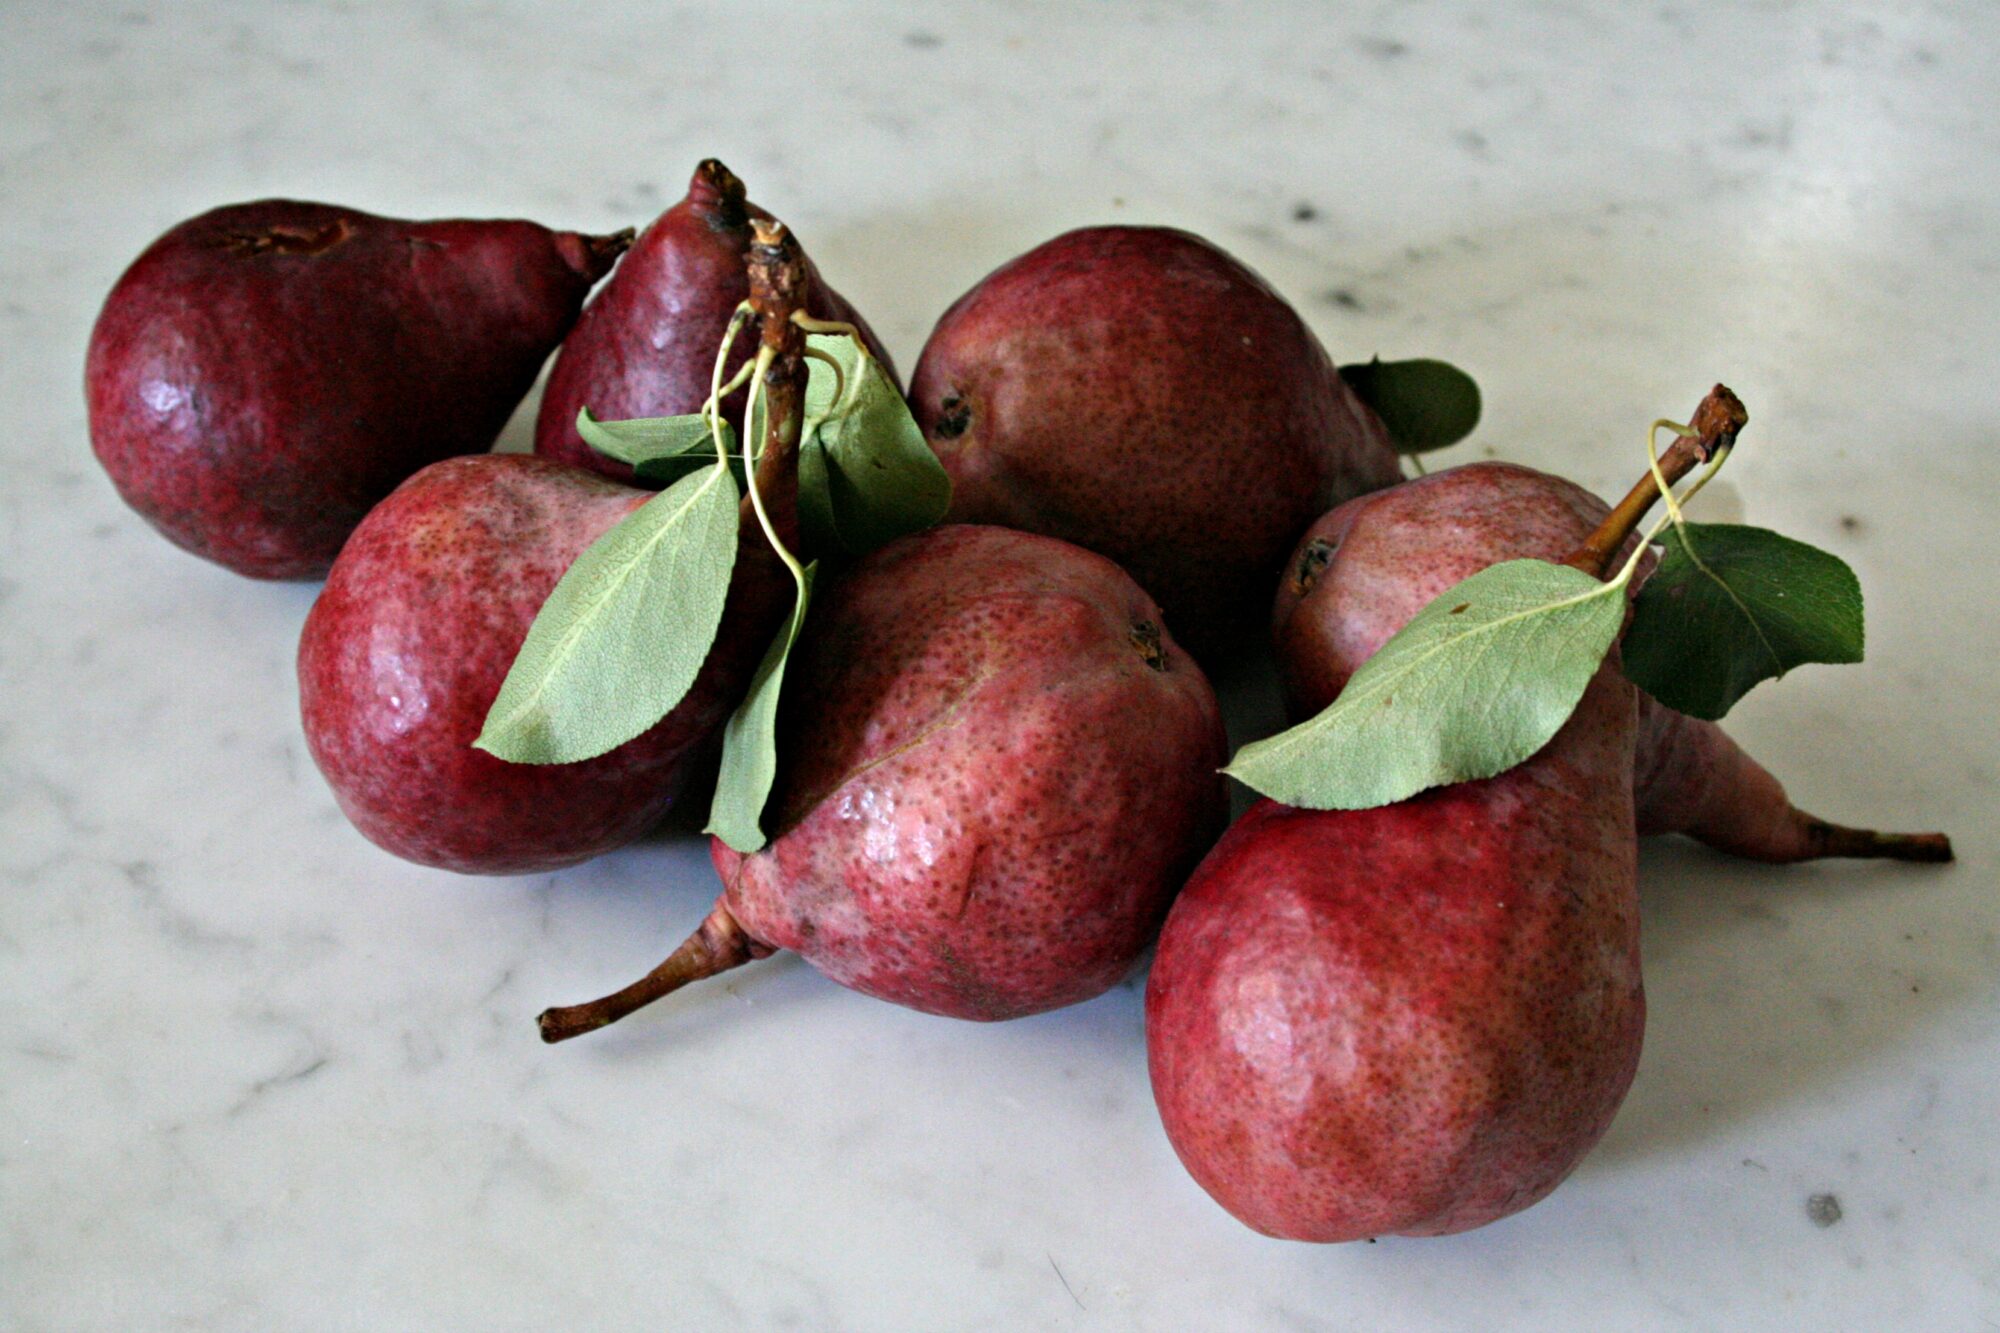 A pile of red pears on a white marble counter.